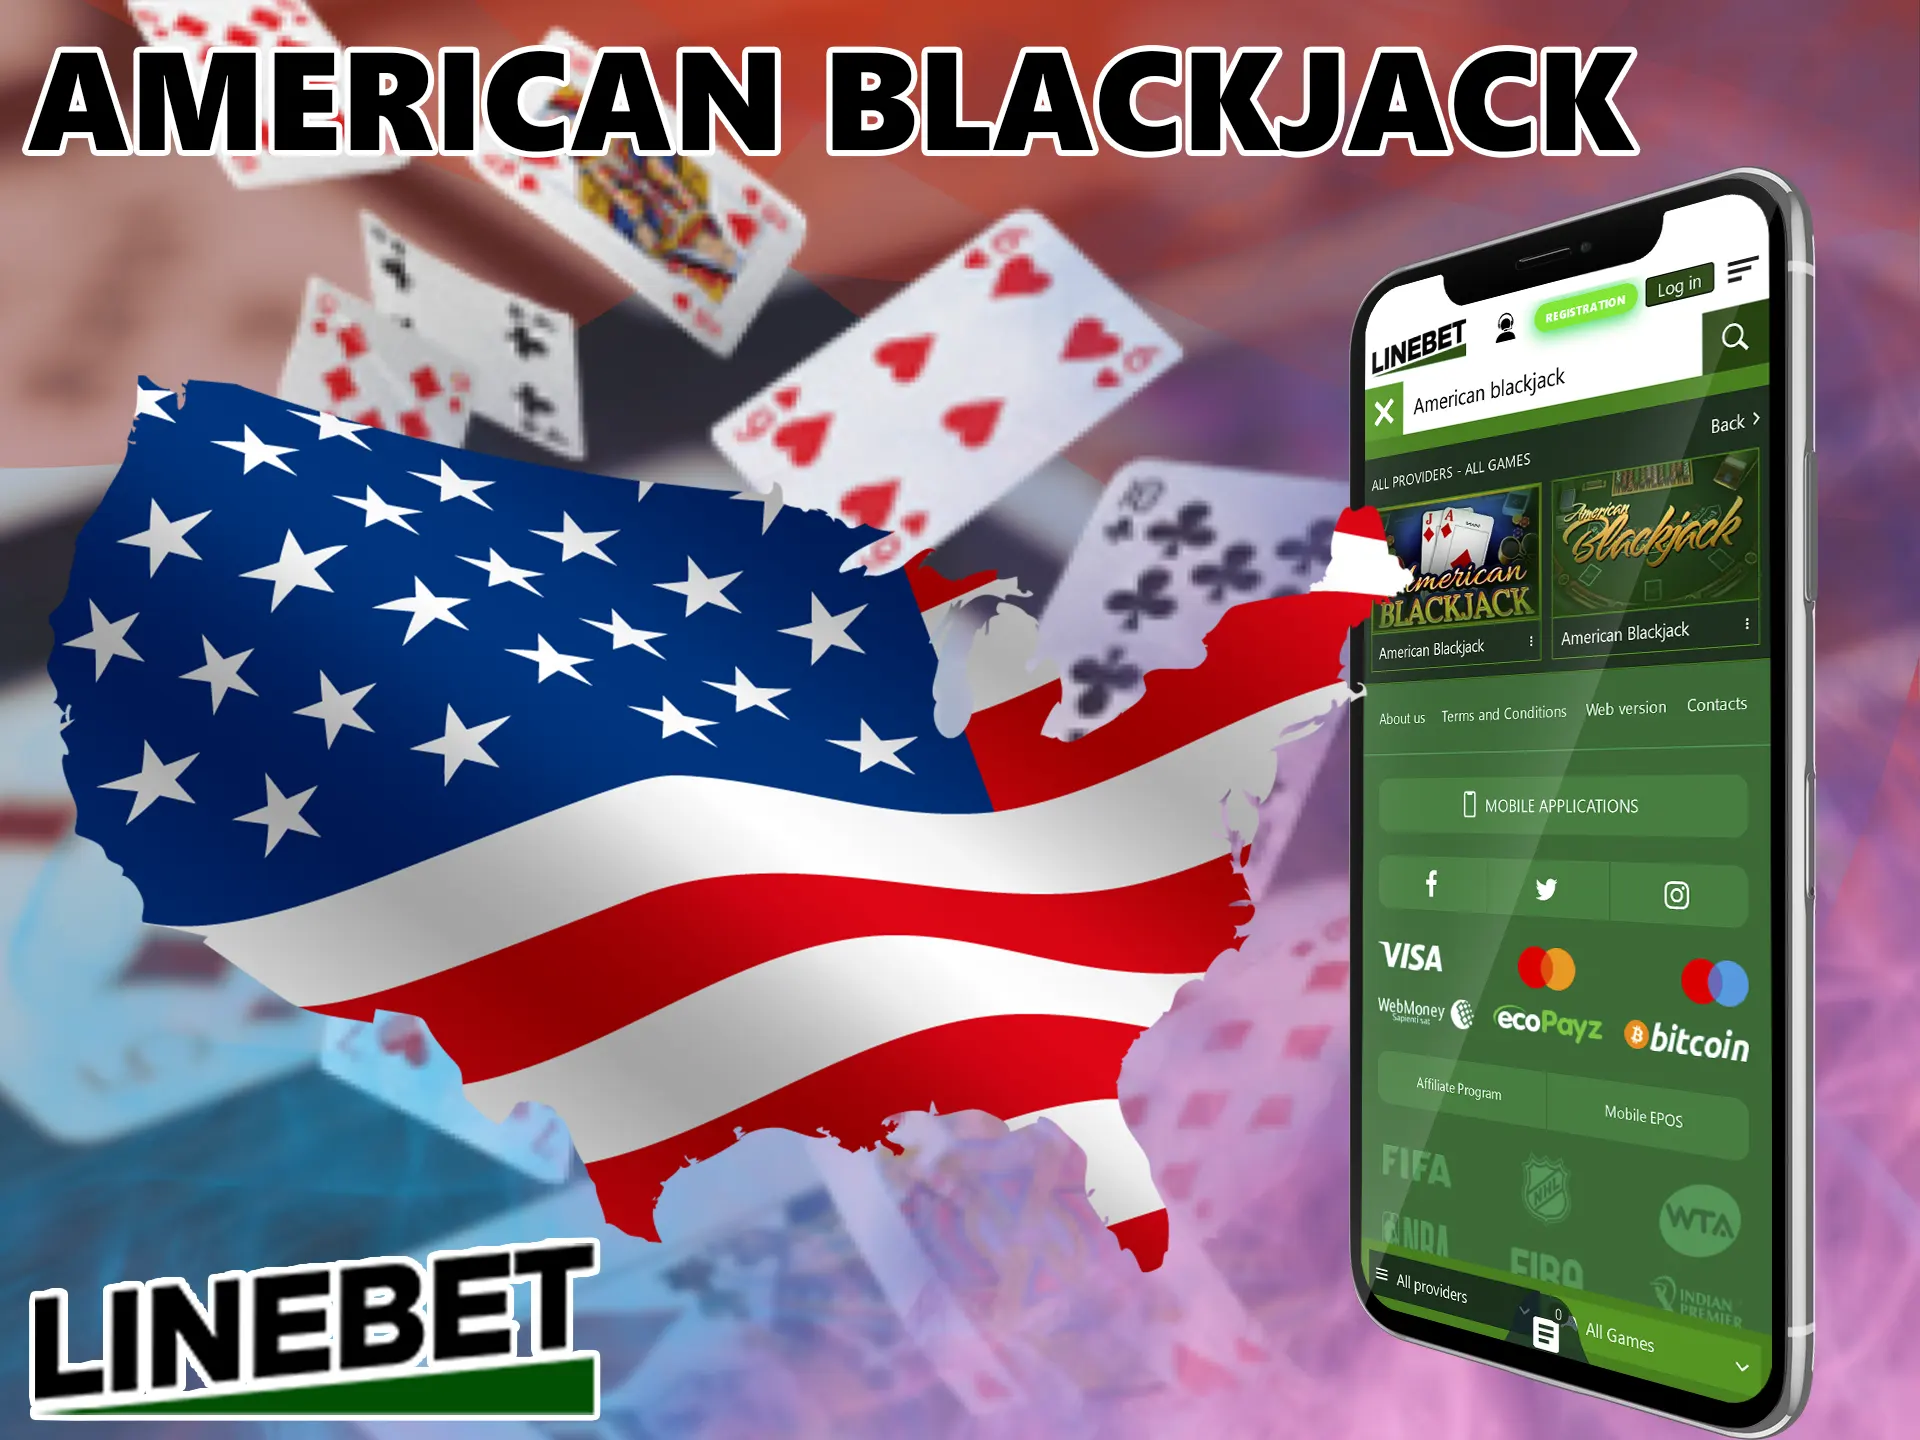 This style requires less risk from the player and is more convenient and practical, you can try it in the app and on the Linebet Casino website.